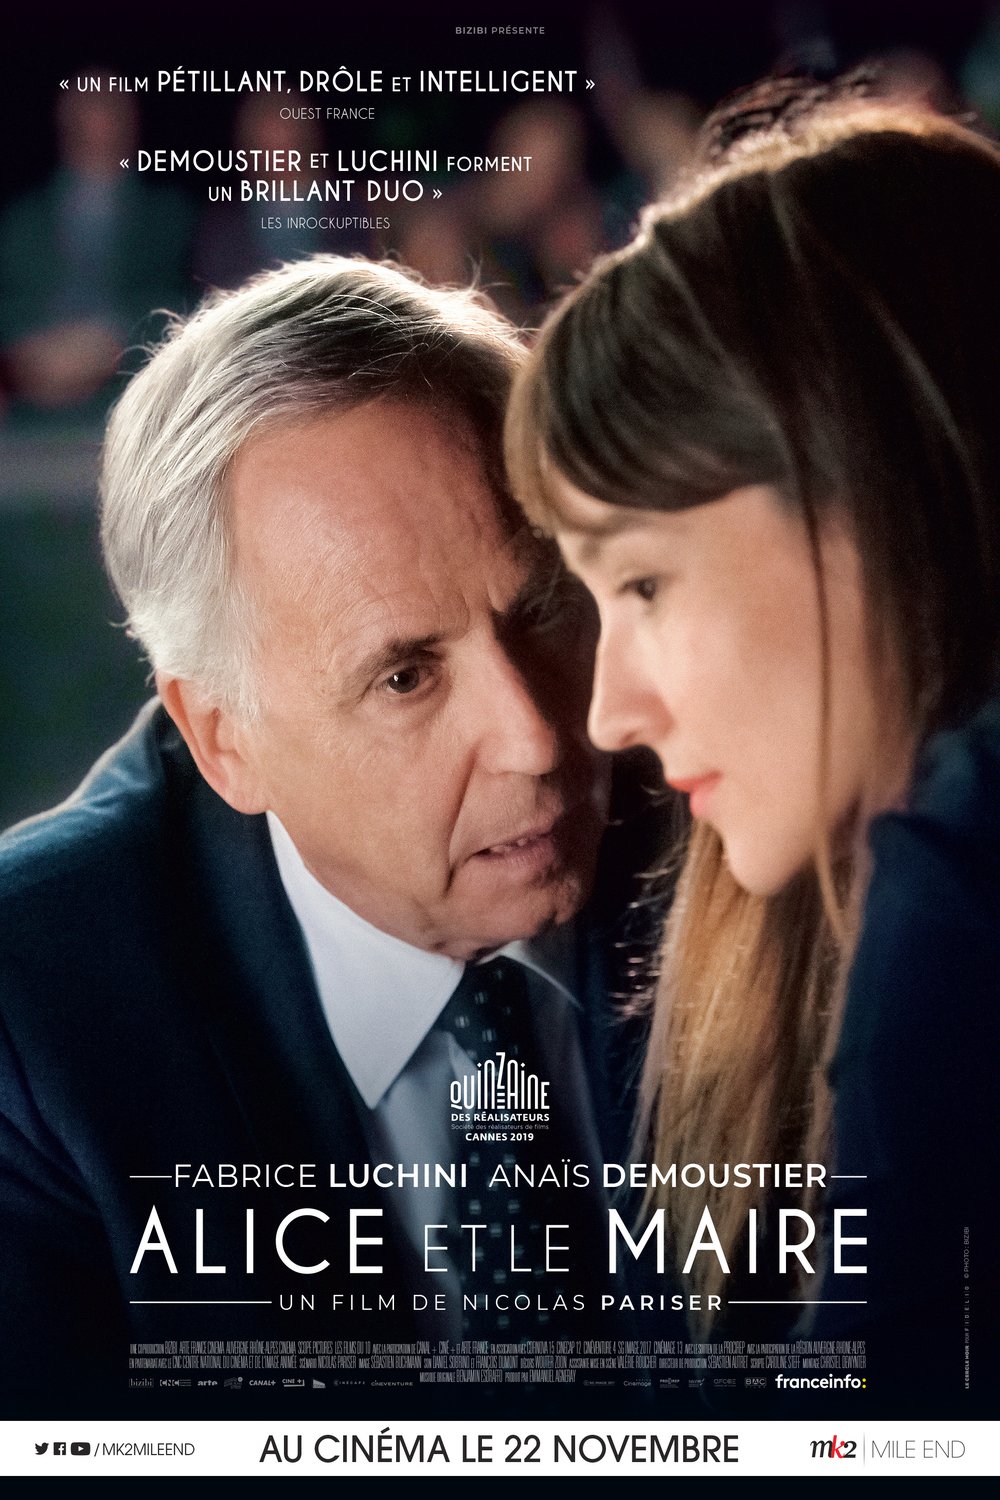 Poster of the movie Alice et le maire